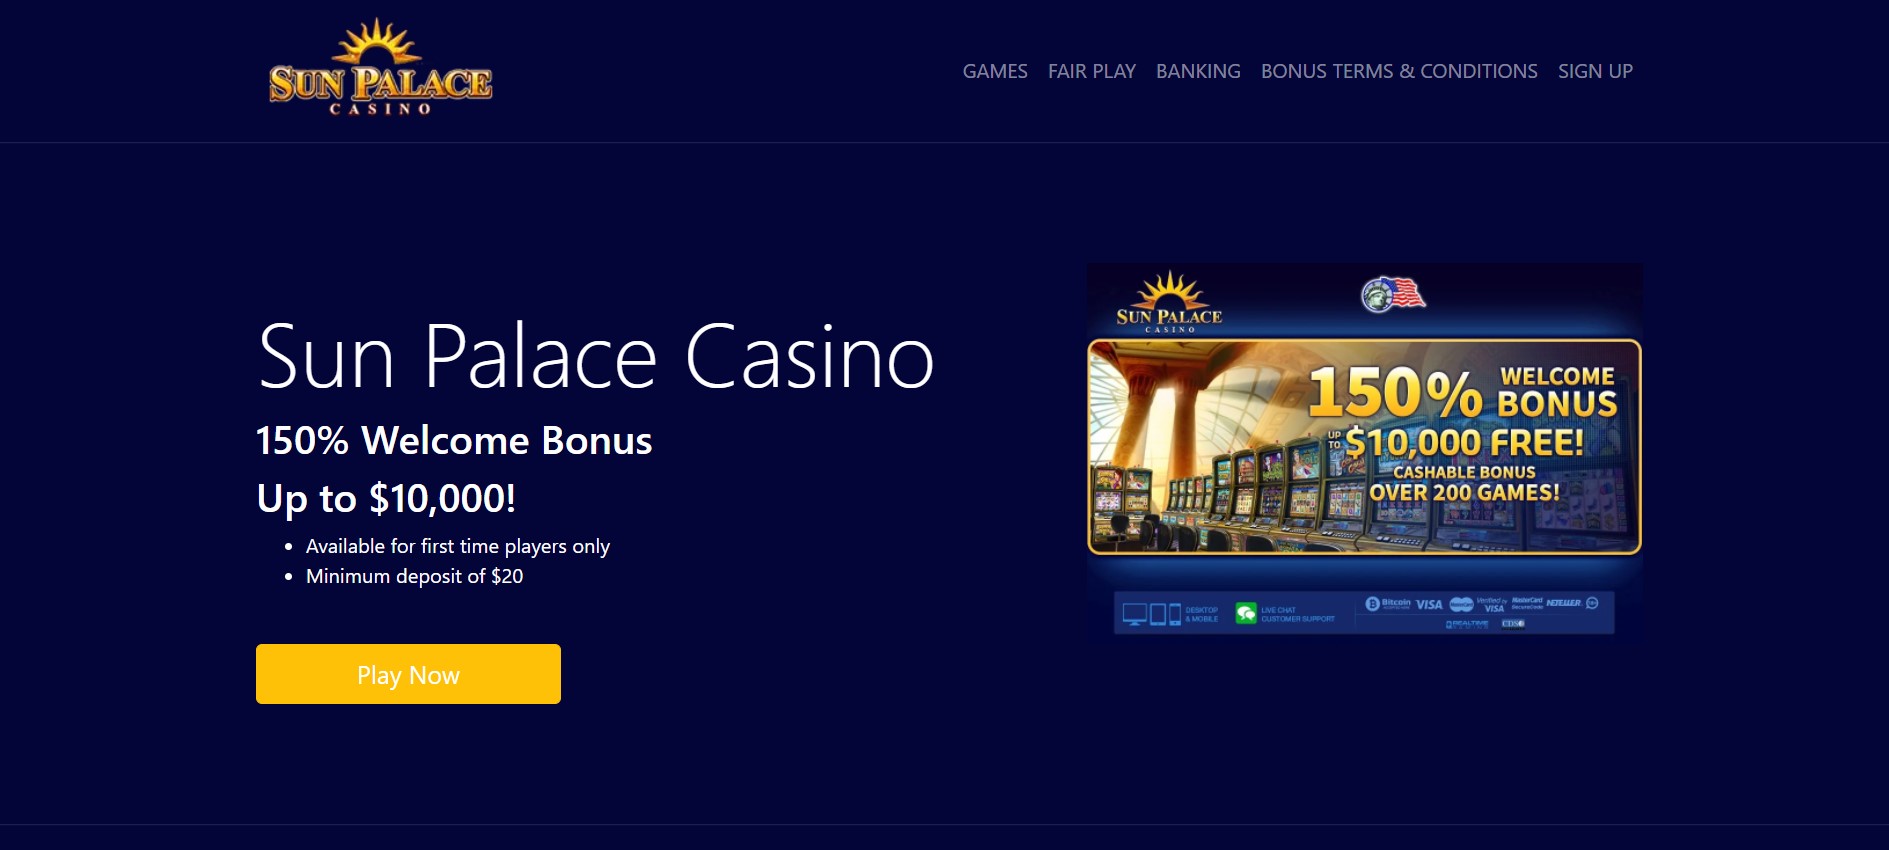 Online casino san palace review